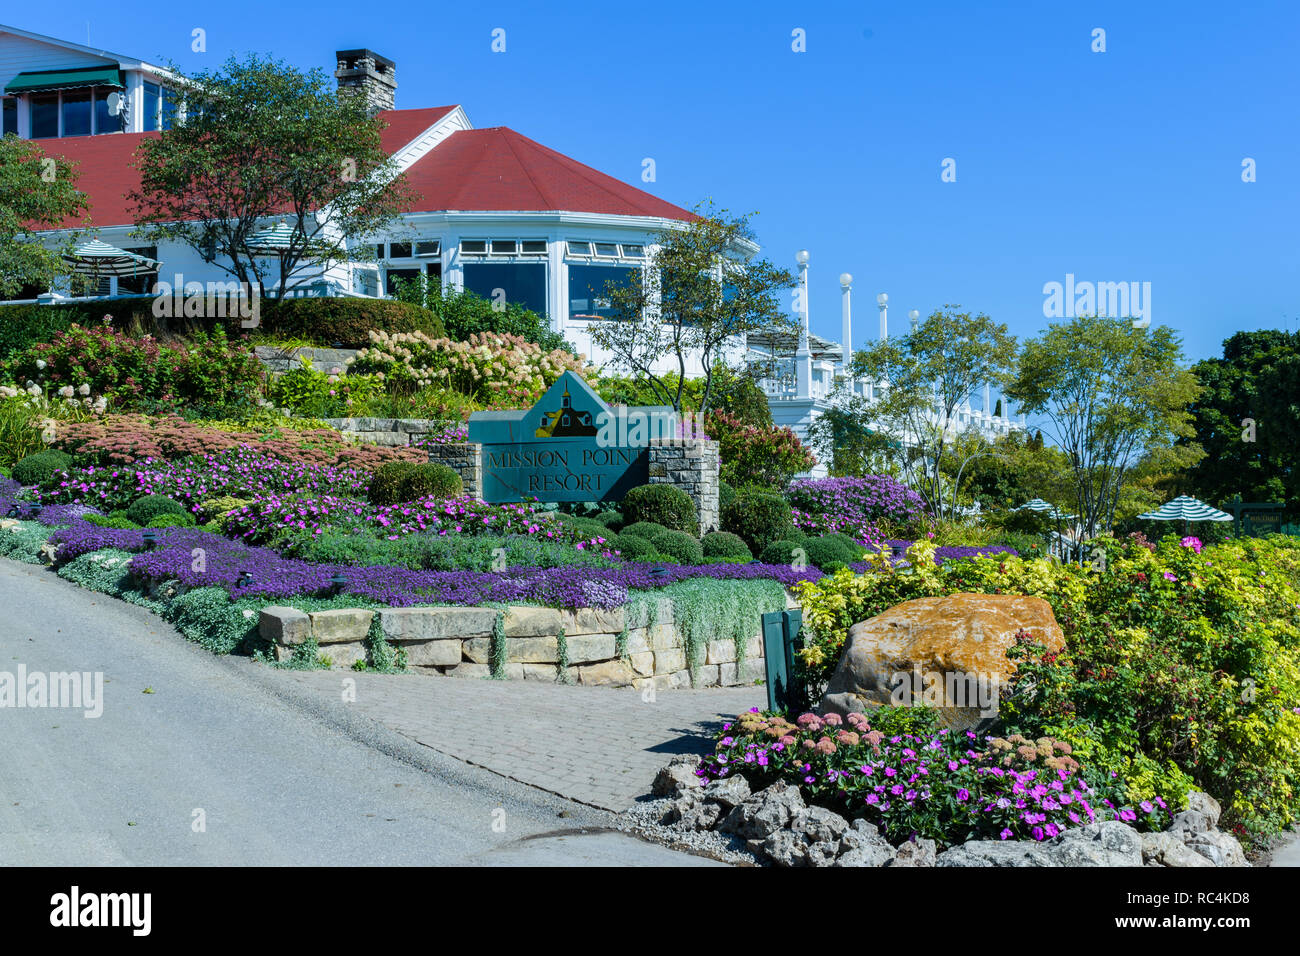 Mackinac Island, Michigan / United States - September 17, 2018: Sign and flower gardens of Mission Point Resort Stock Photo